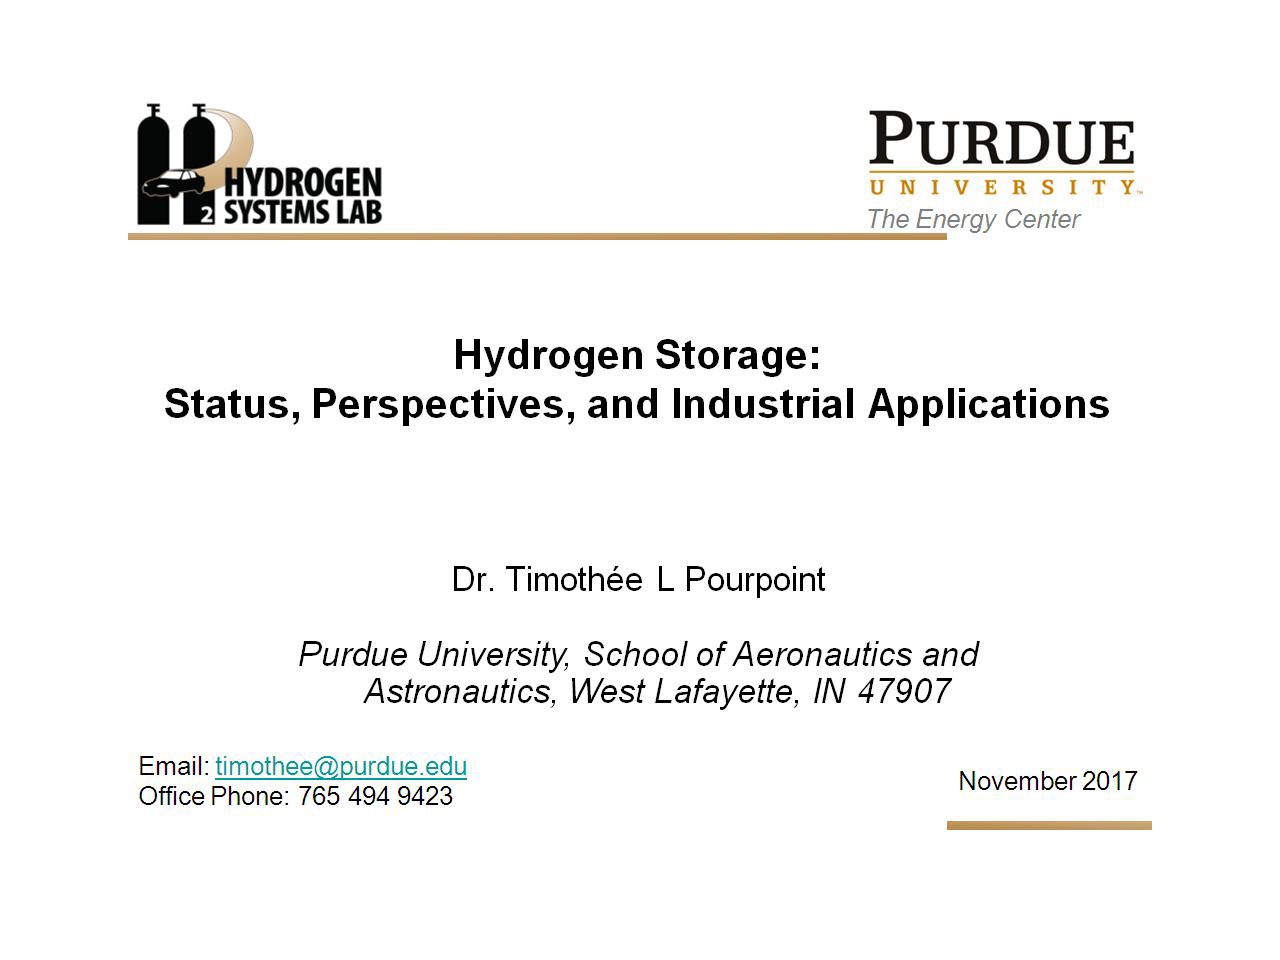 Hydrogen Storage: Status, Perspectives, and Industrial Applications